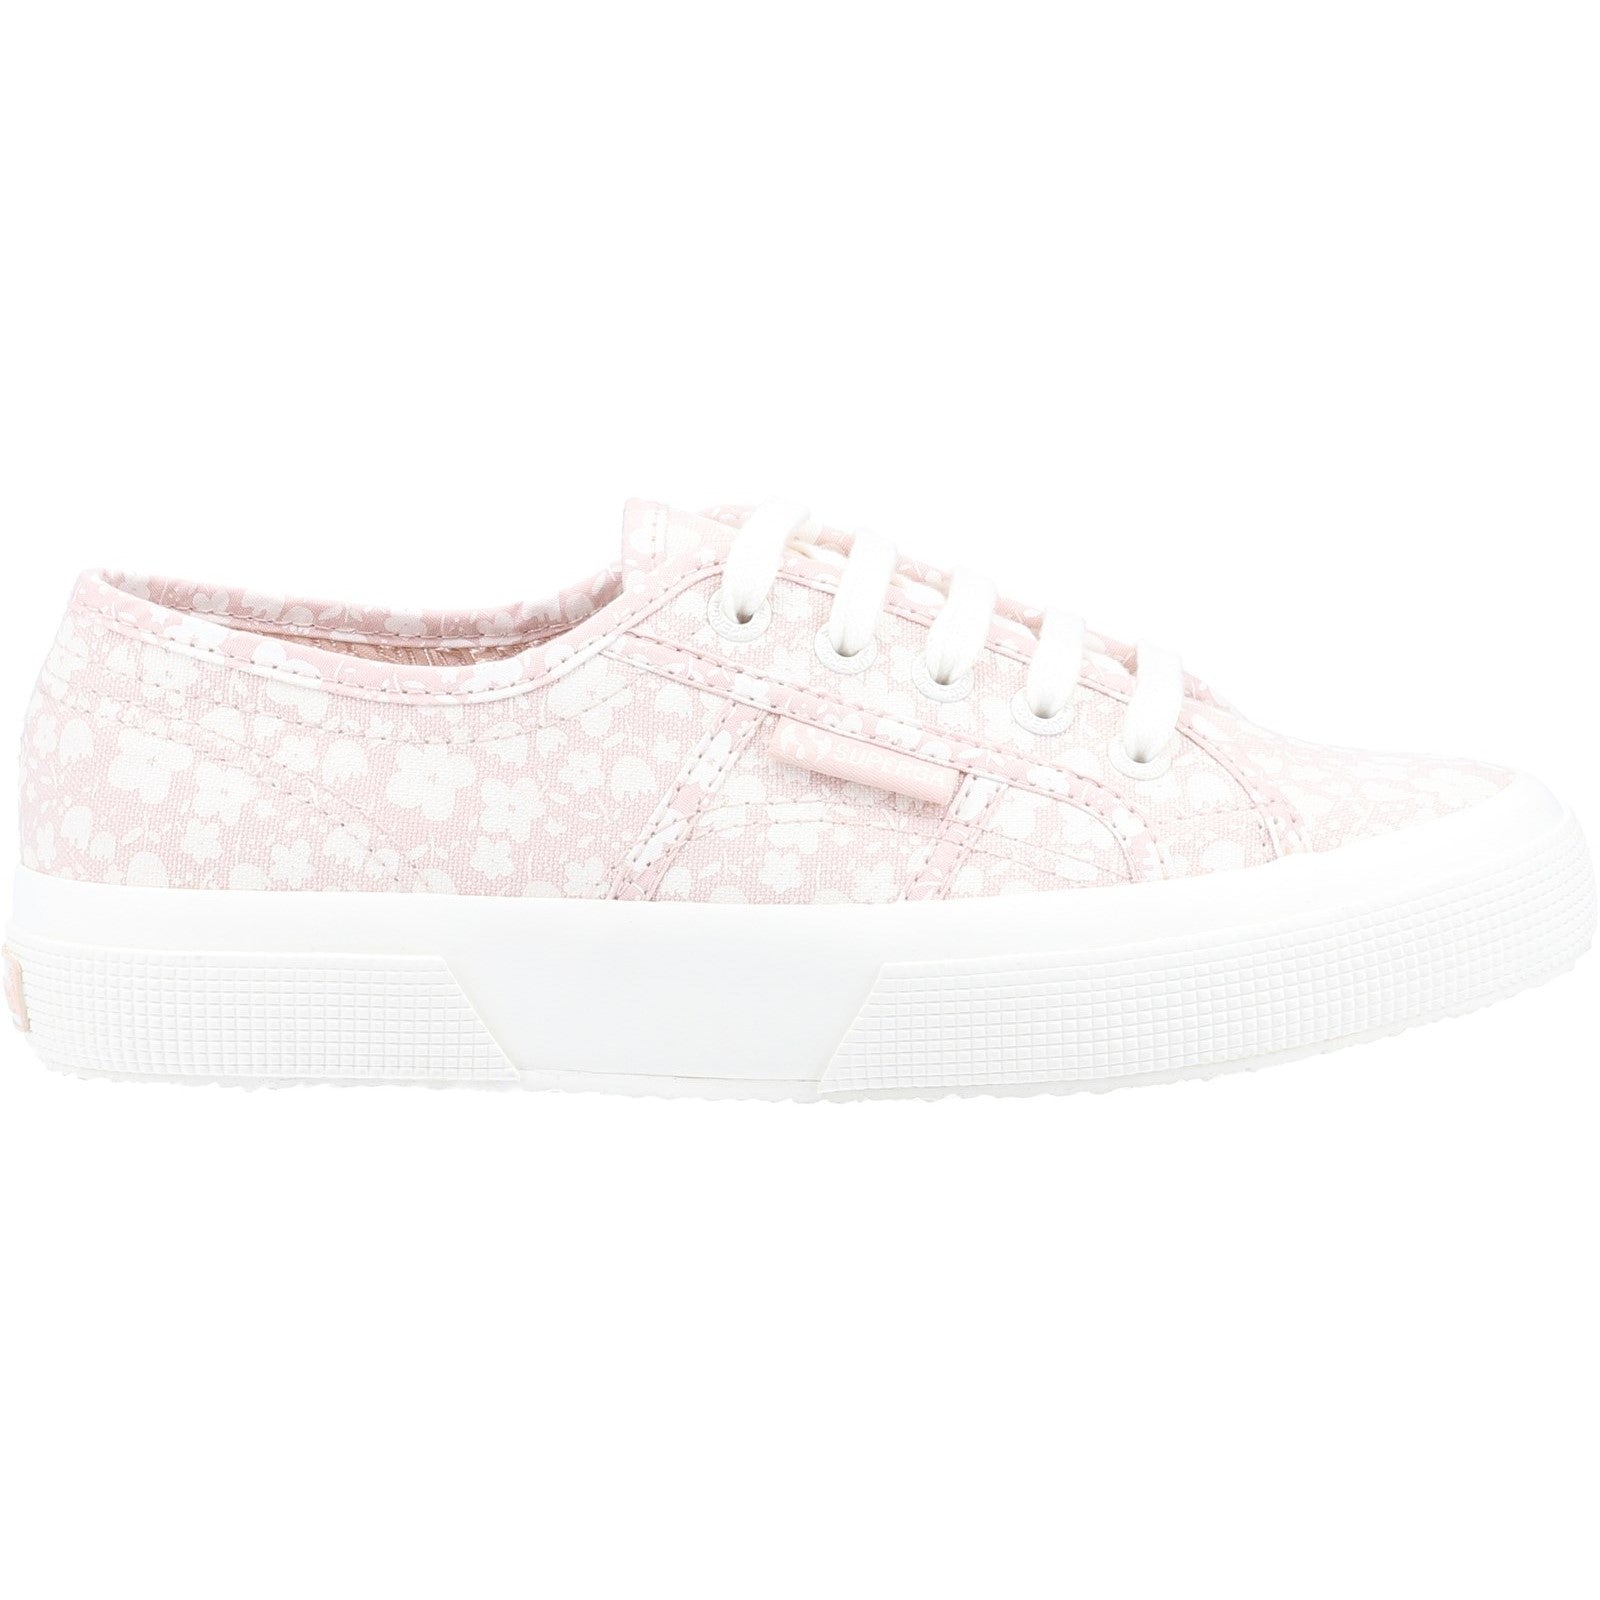 Superga Womens 2750 Floral Print Trainers - Pink